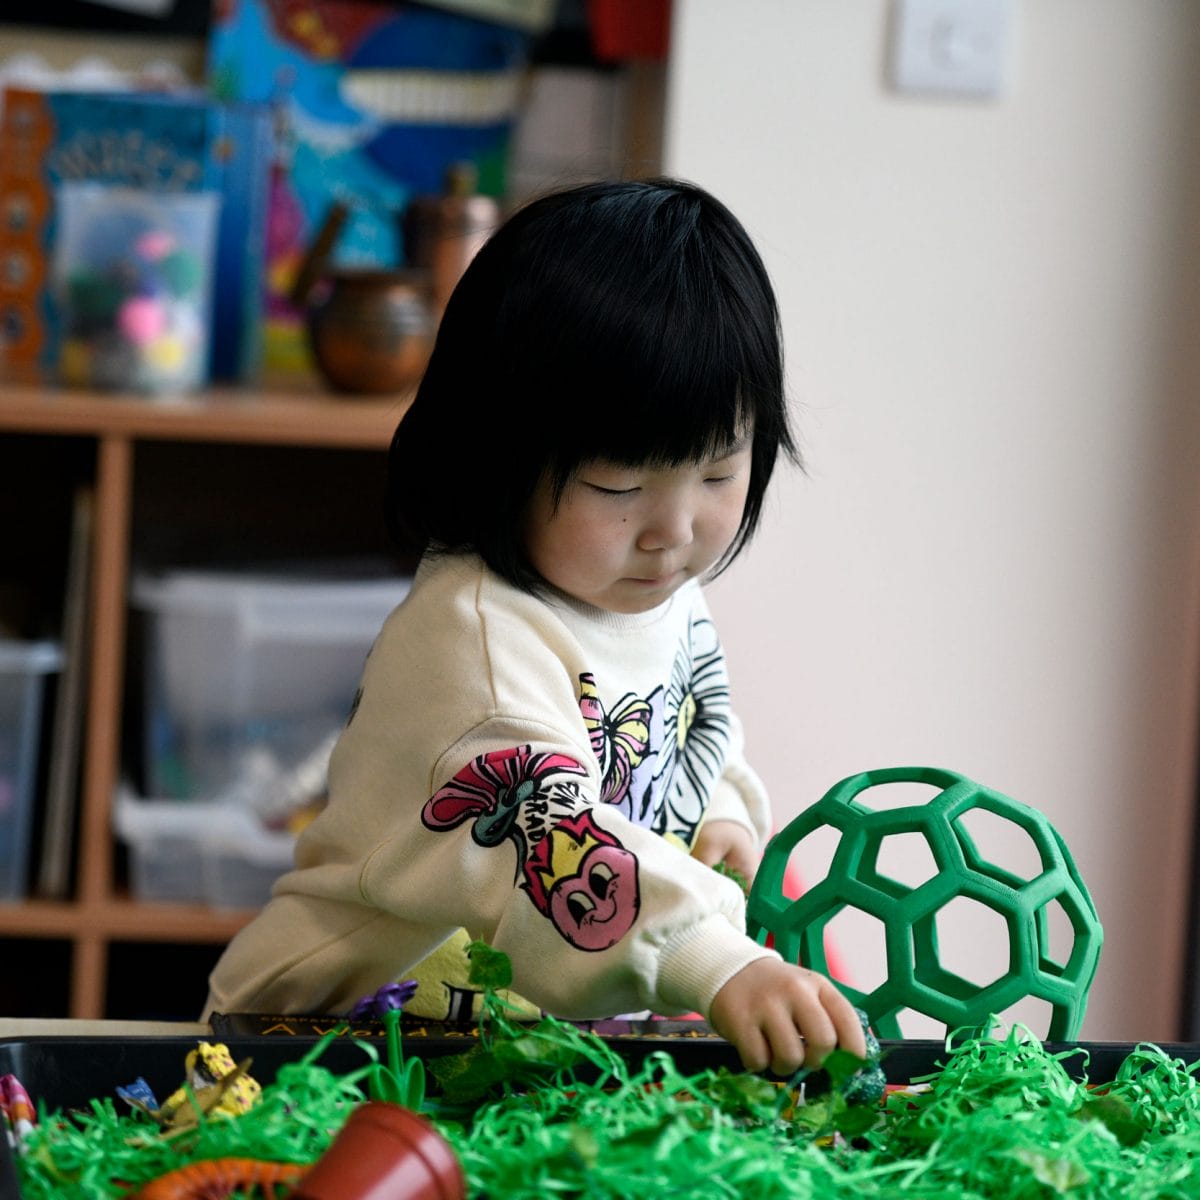 A girl playing with toys at The Blue Coat School's Stay and Play admissions event.